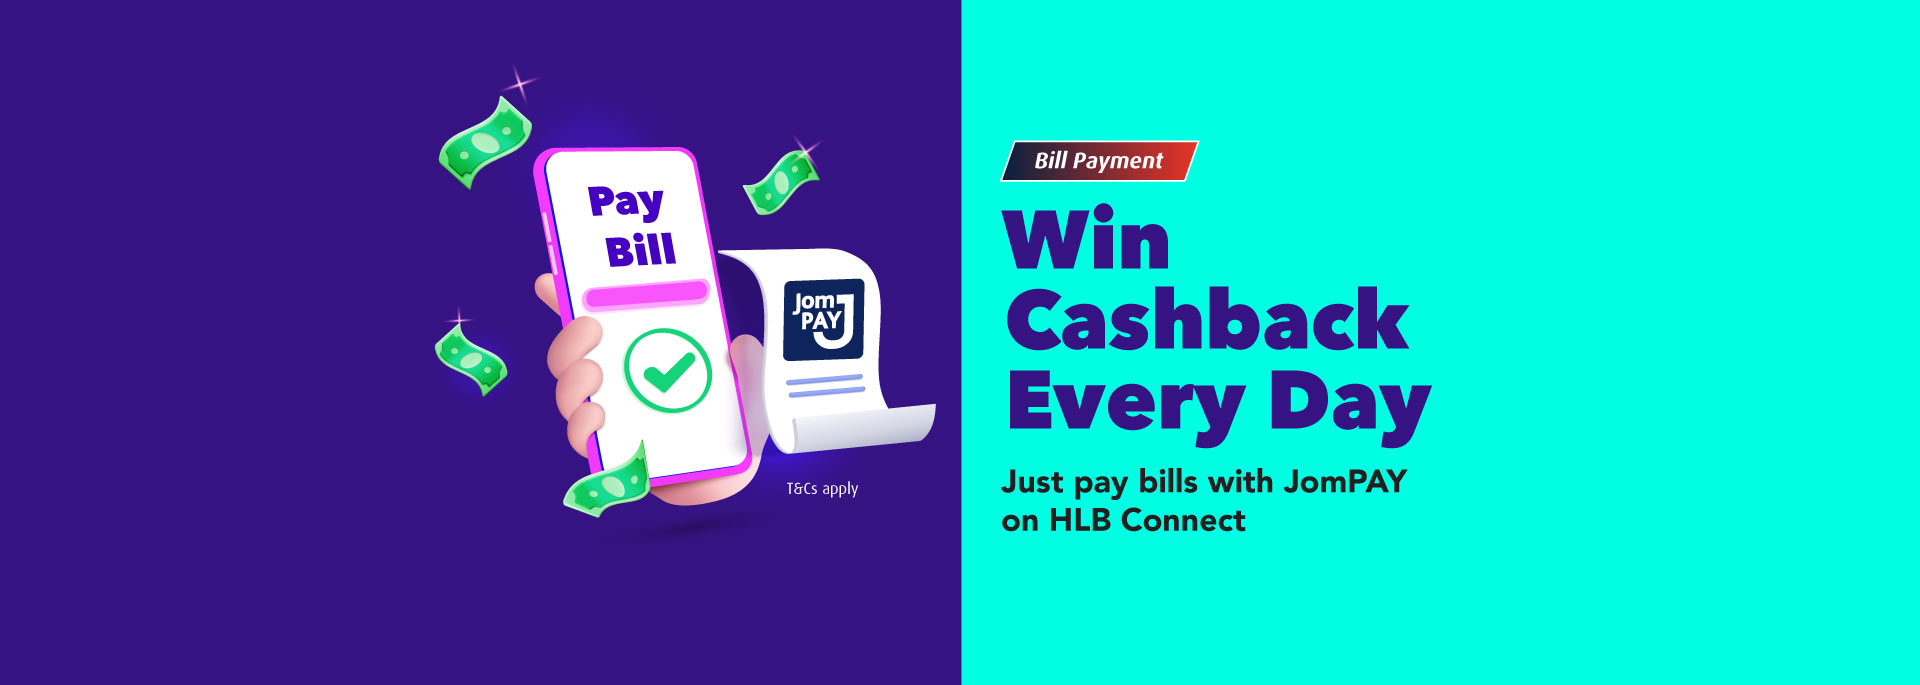 Bill Payment Promotion